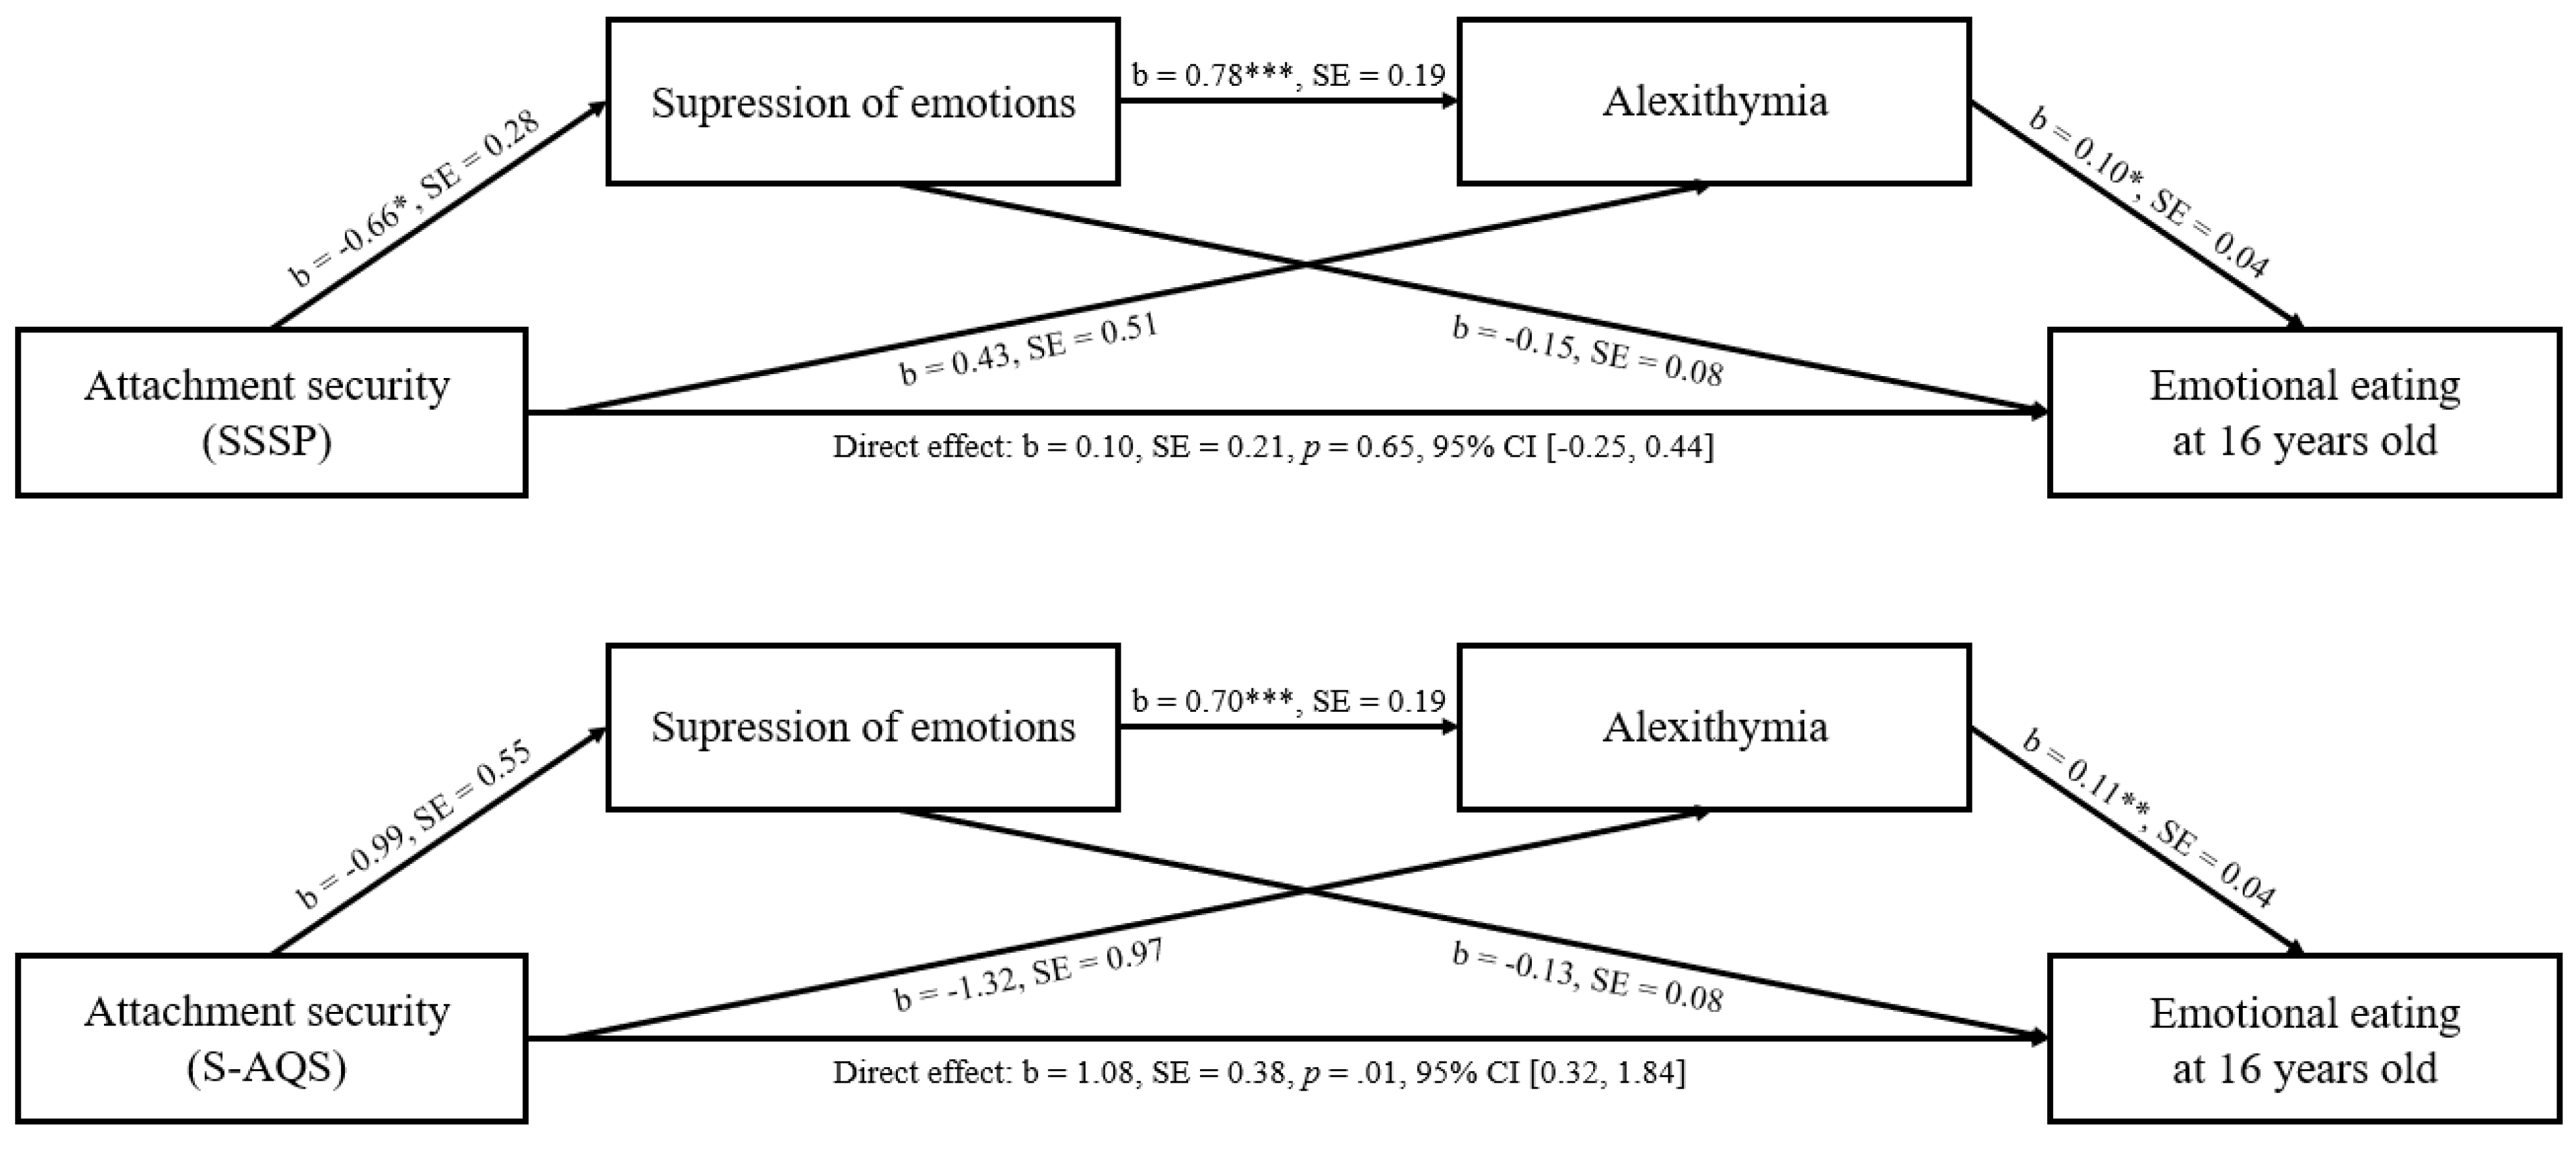 Nutrients | Free Full-Text | Parent–Infant Attachment Insecurity and  Emotional Eating in Adolescence: Mediation through Emotion Suppression and  Alexithymia | HTML